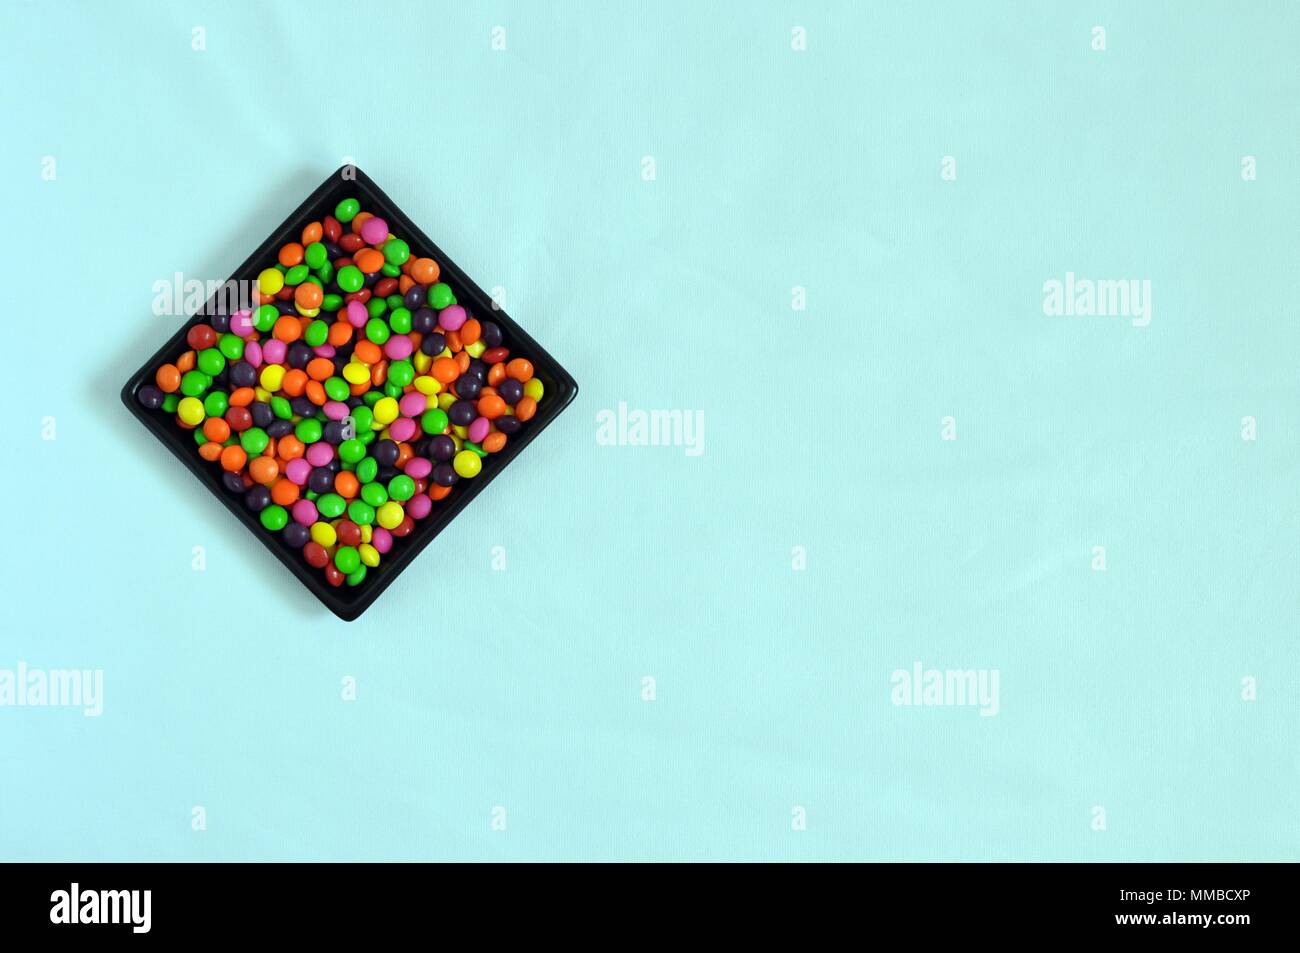 Black plate filled with litlle colorful candies on light blue backgroung, copy space, top view Stock Photo